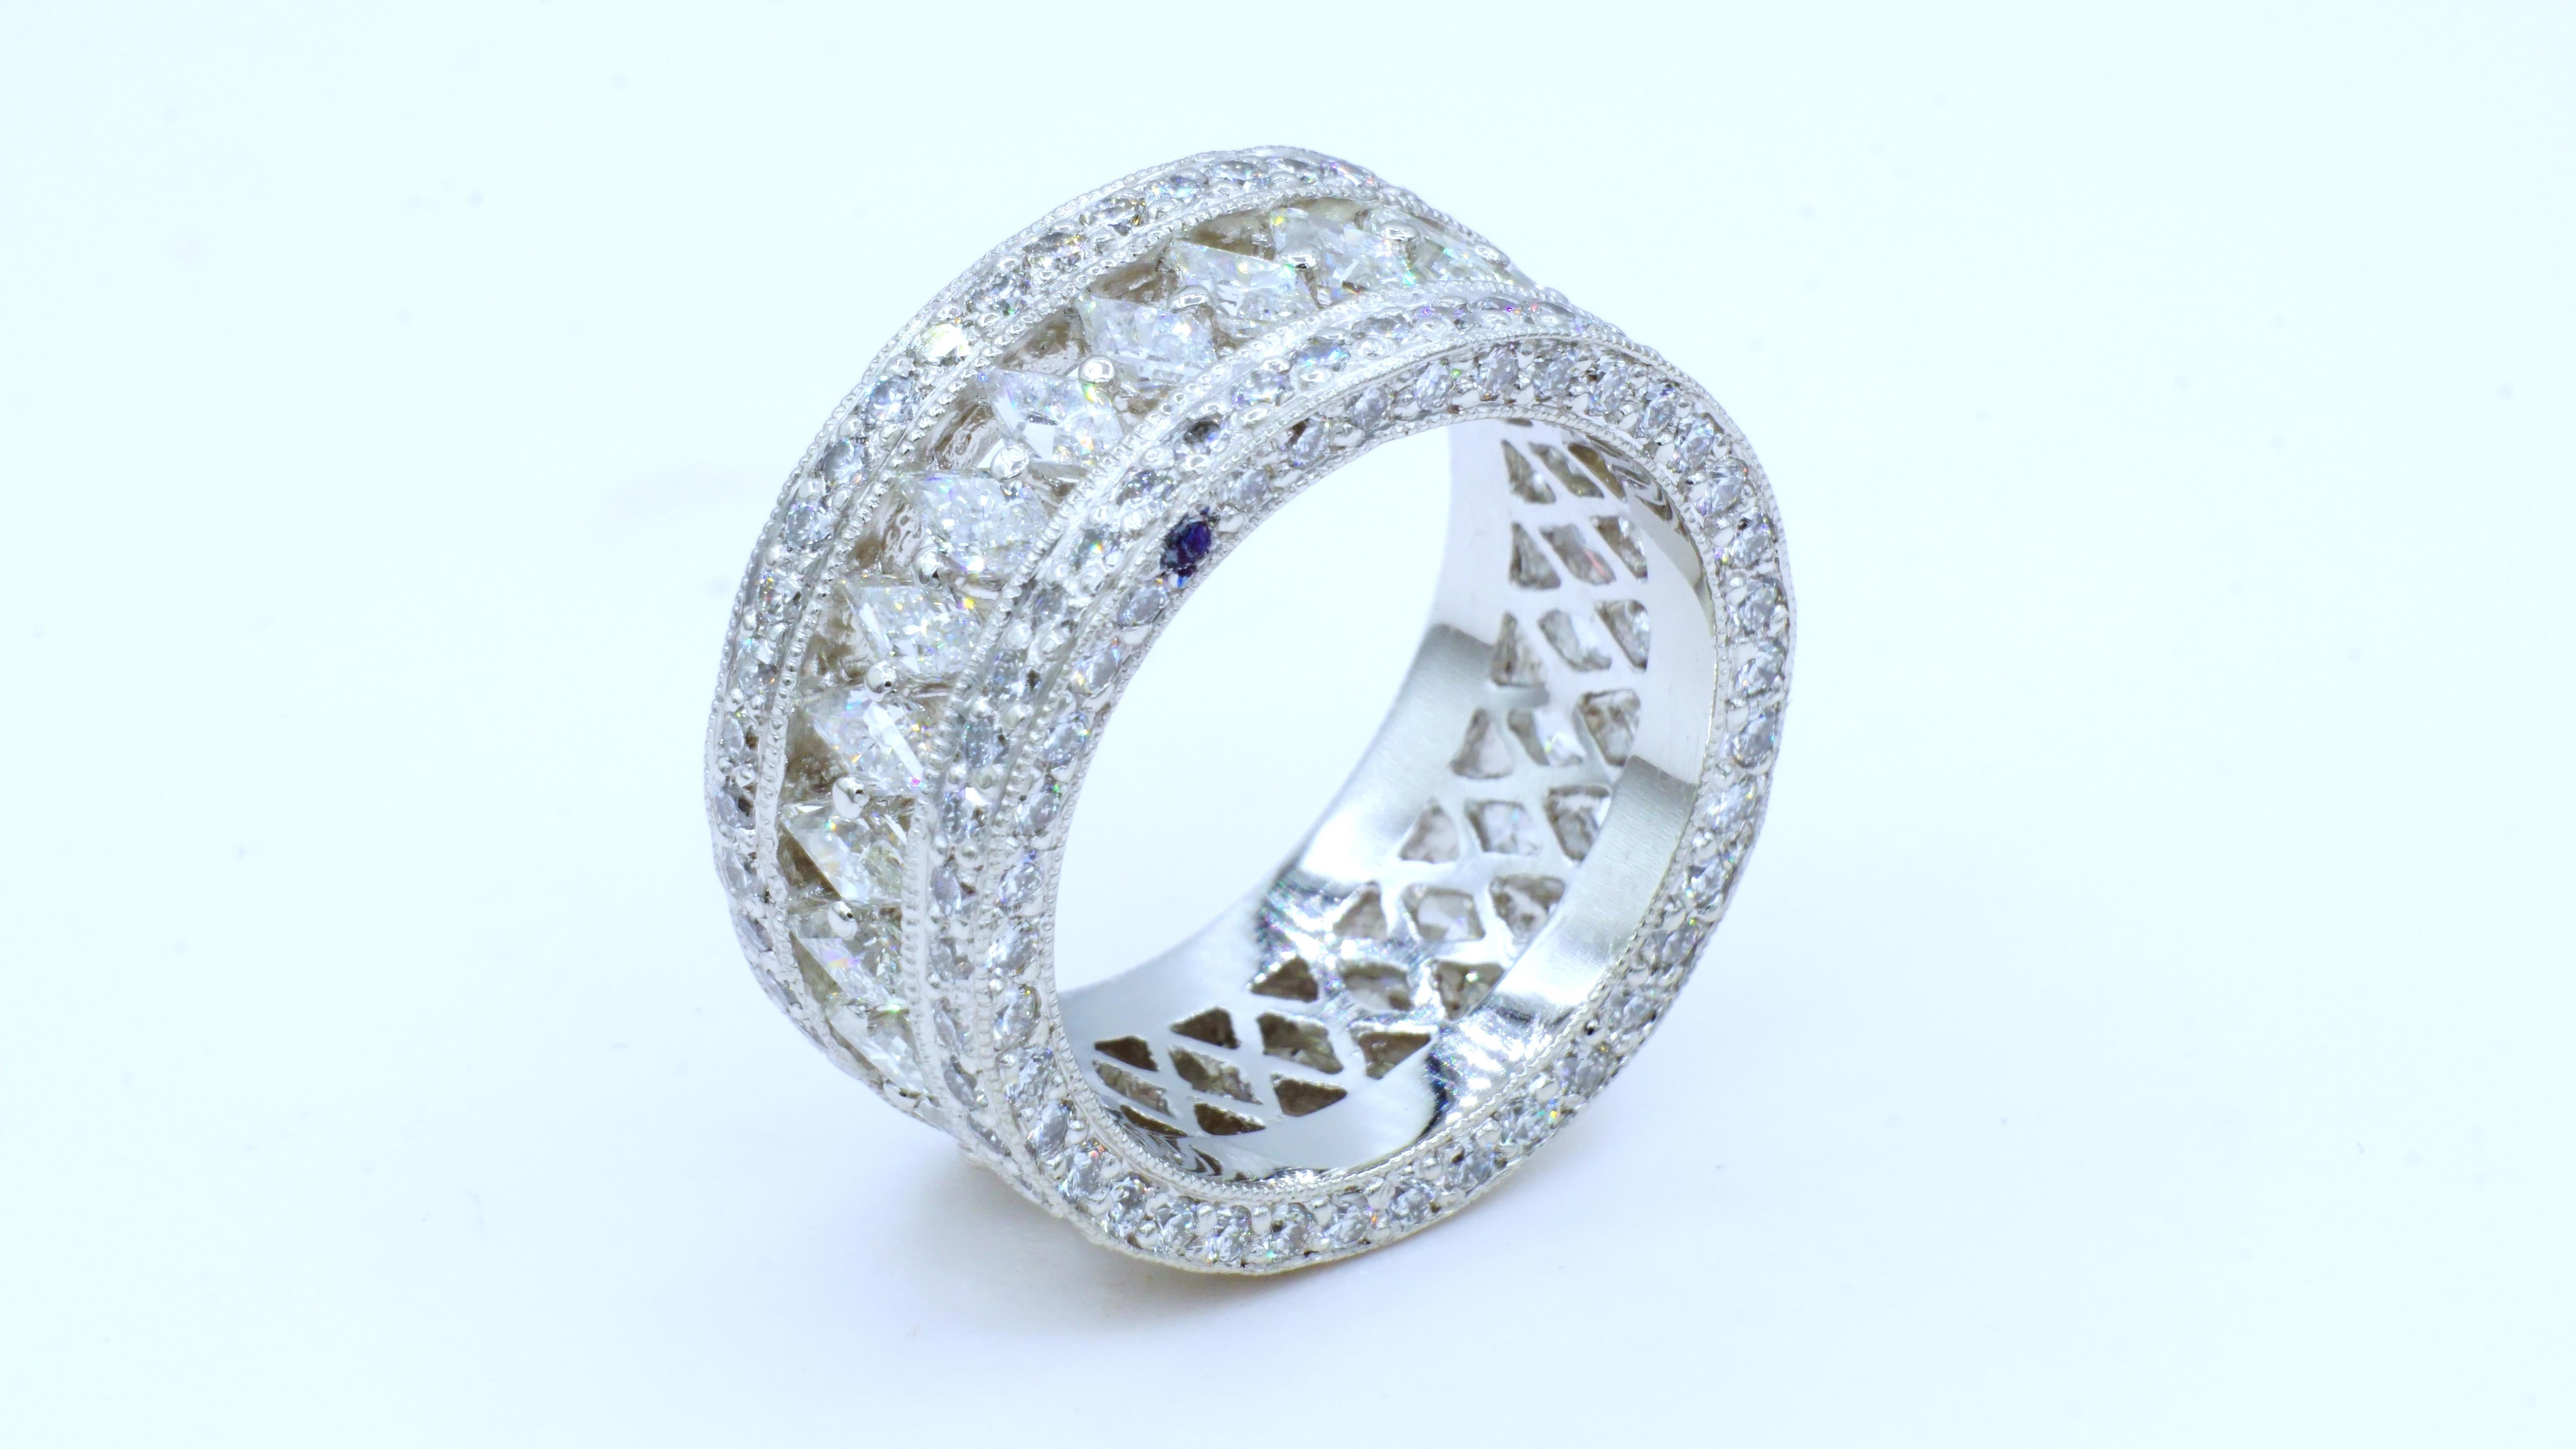 True one-of-a-kind custom platinum eternity ring showcasing a center row of  25 channel/prong set custom-cut diamonds of 3.00cttw. Accenting the center row of diamonds are two rows of 162 round brilliant diamonds that are 1.80cttw.  On the side